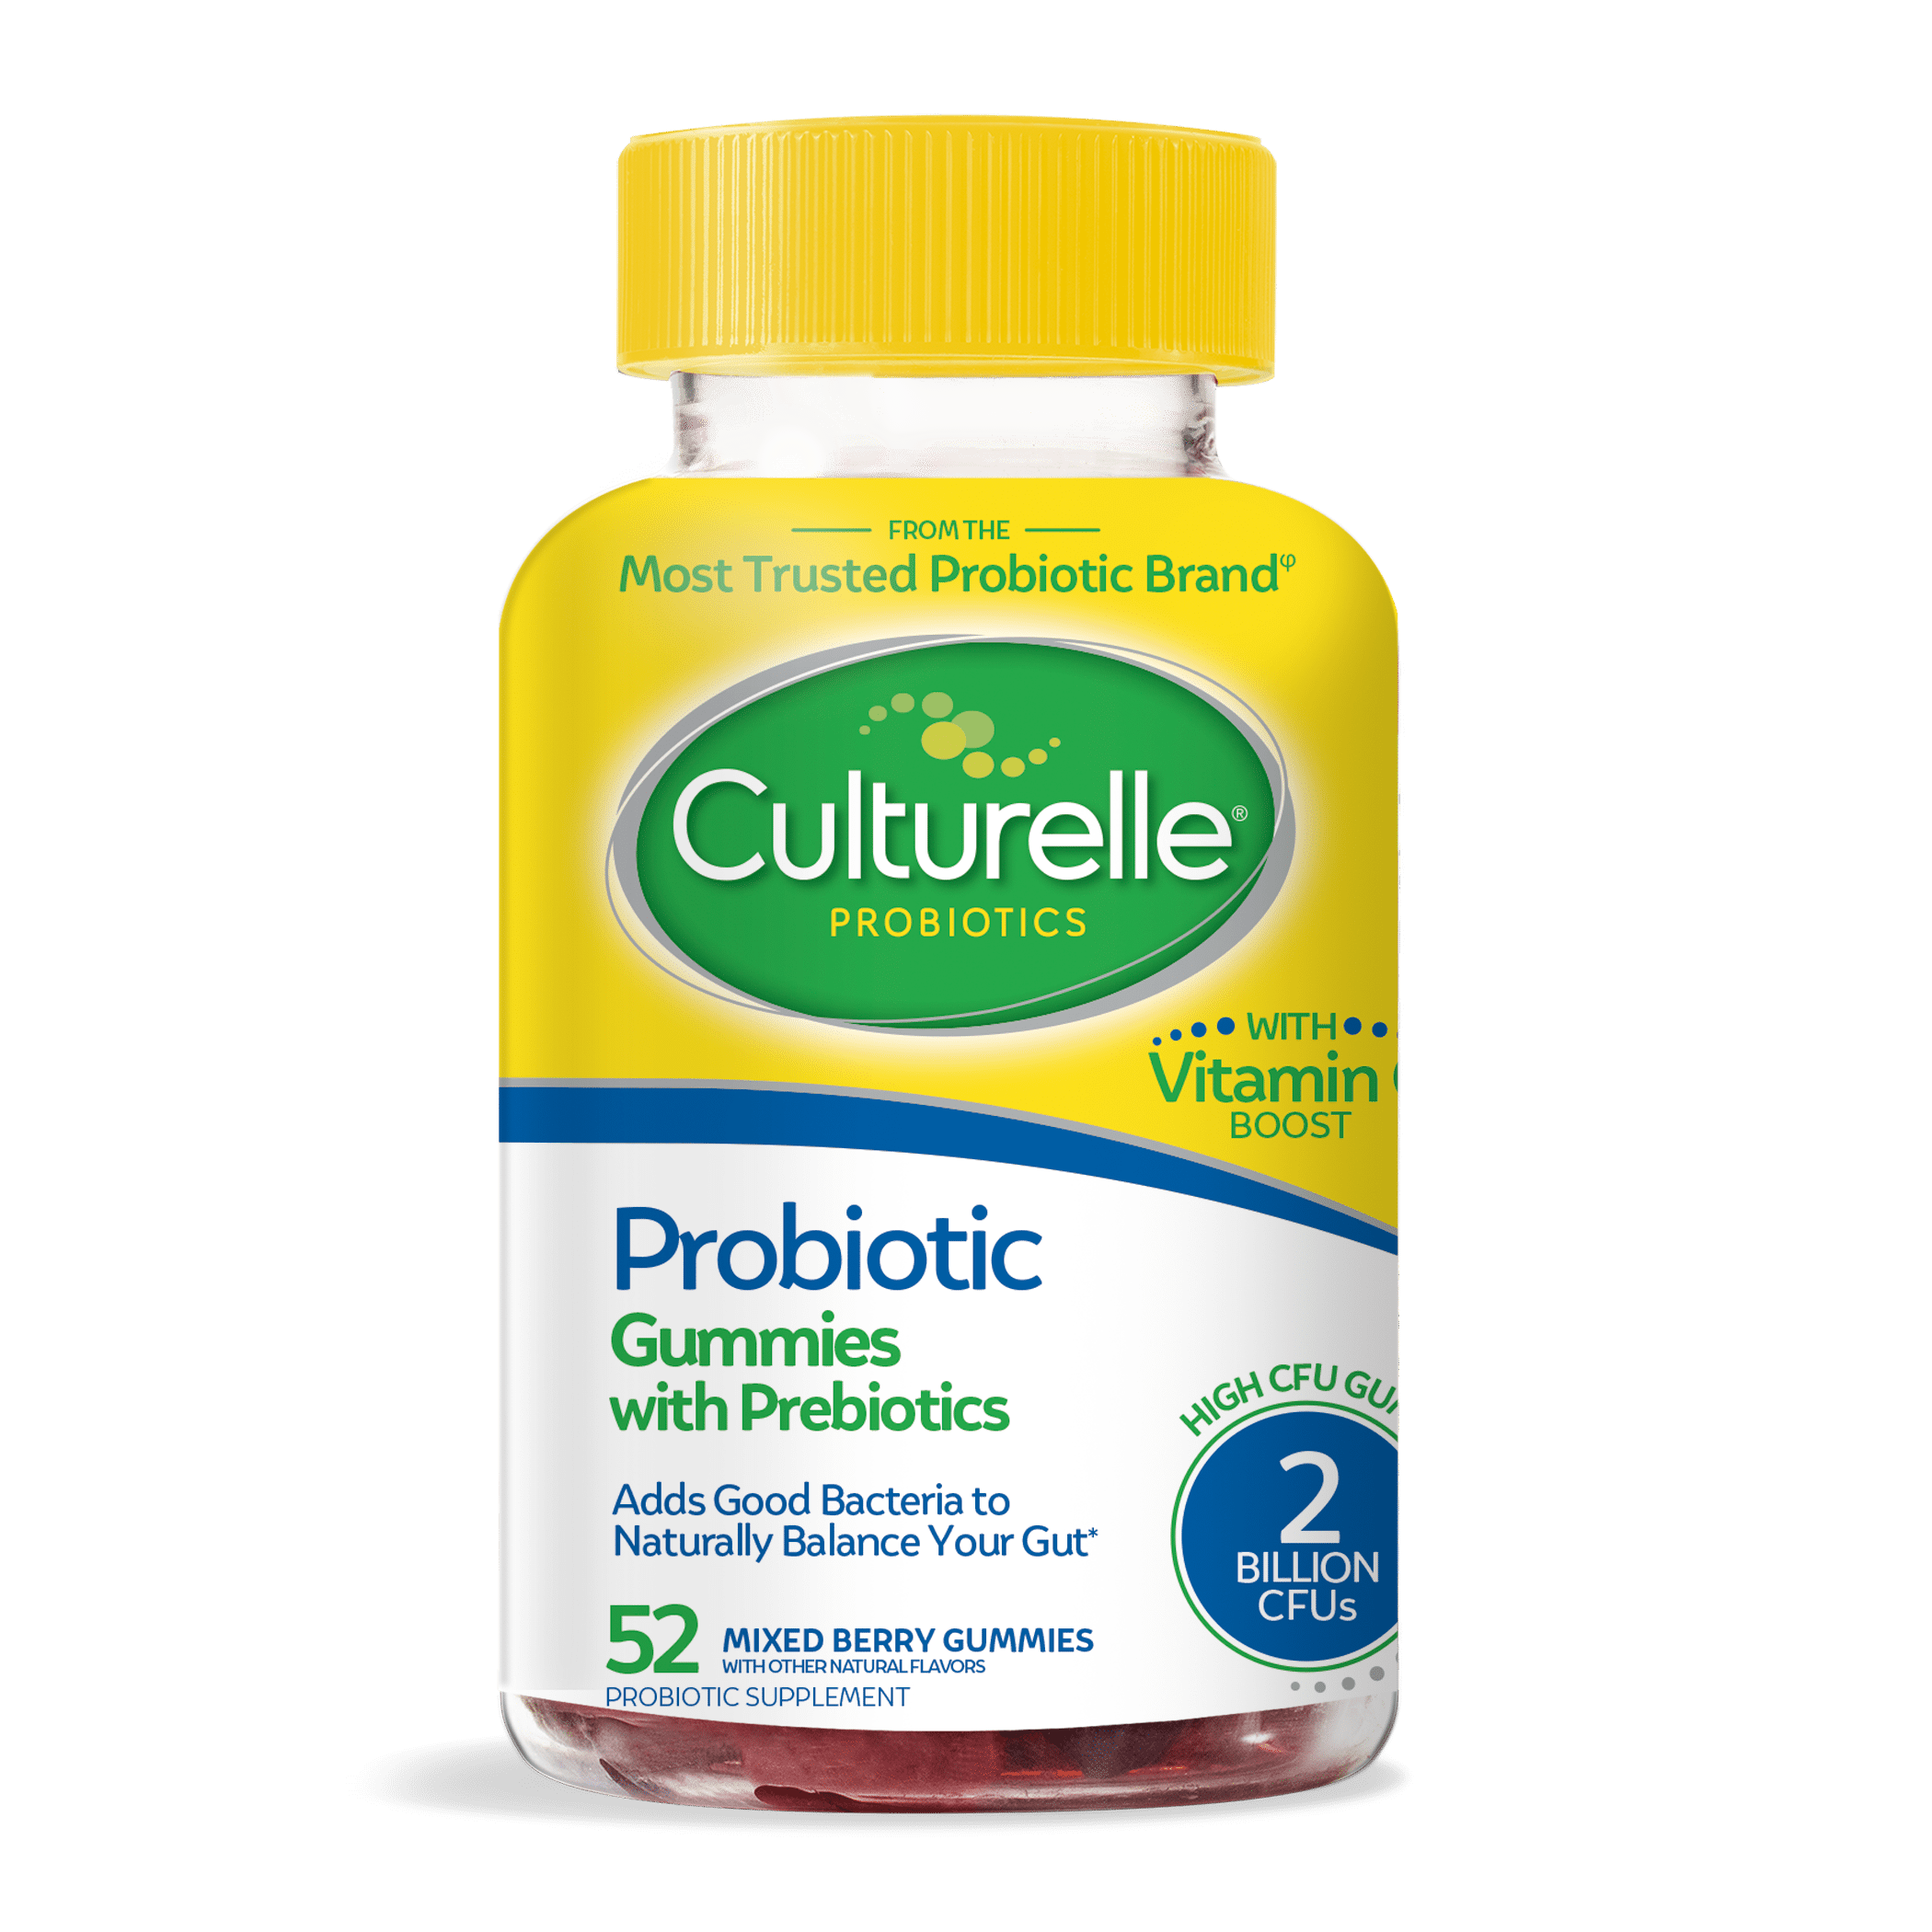 “Boost Your Gut Health: The Power of Prebiotics for Older Adults”